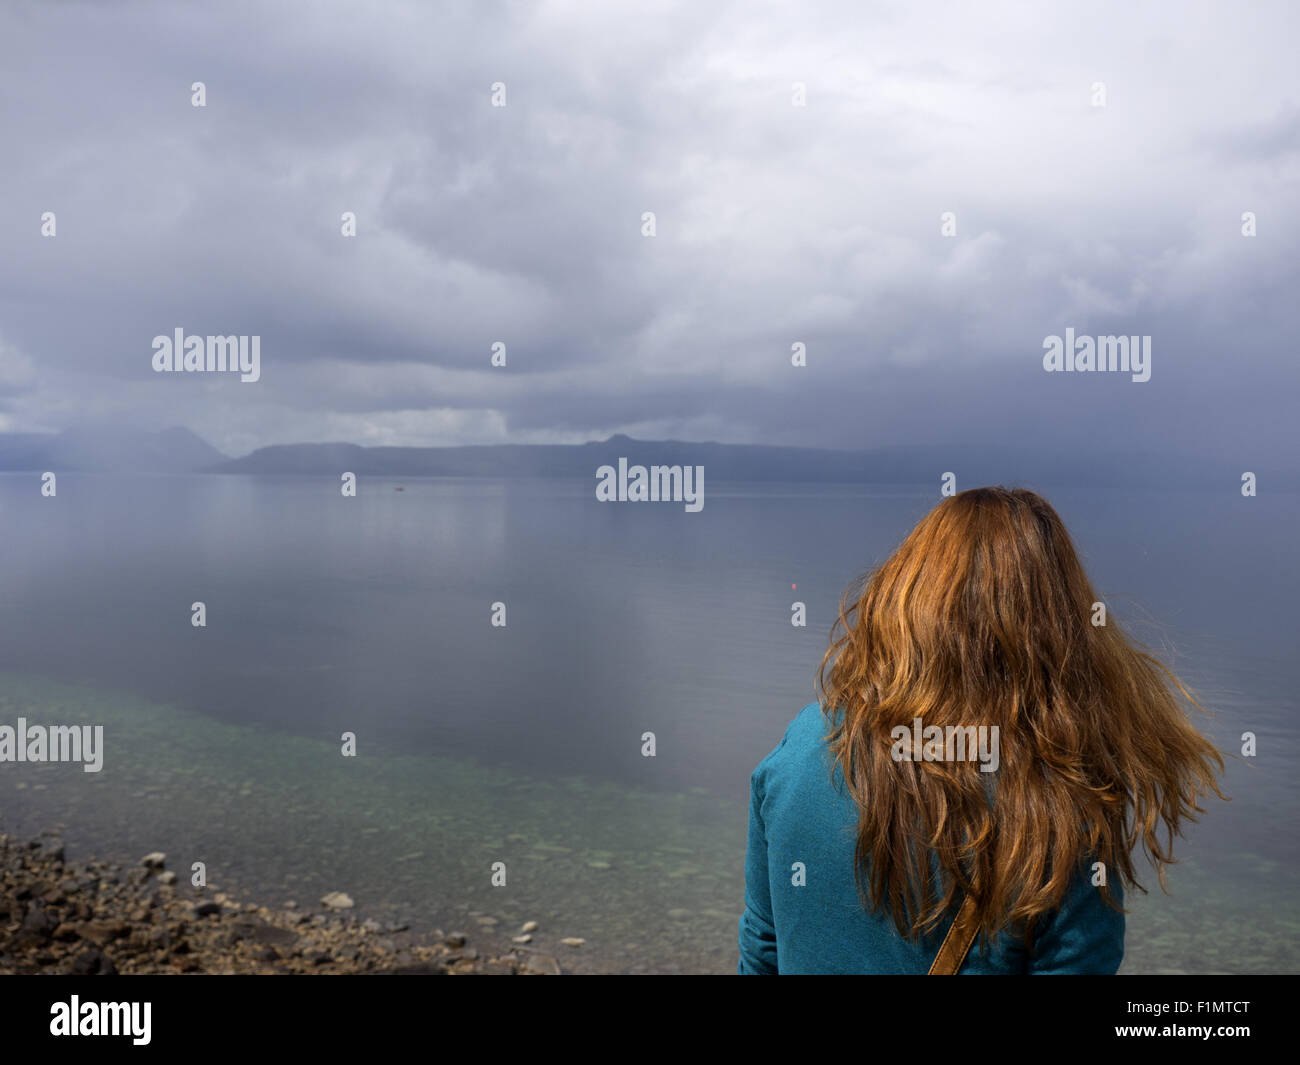 Woman with auburn or chestnut hair looks across to the Isle of Skye from Applecross in Scotland Stock Photo